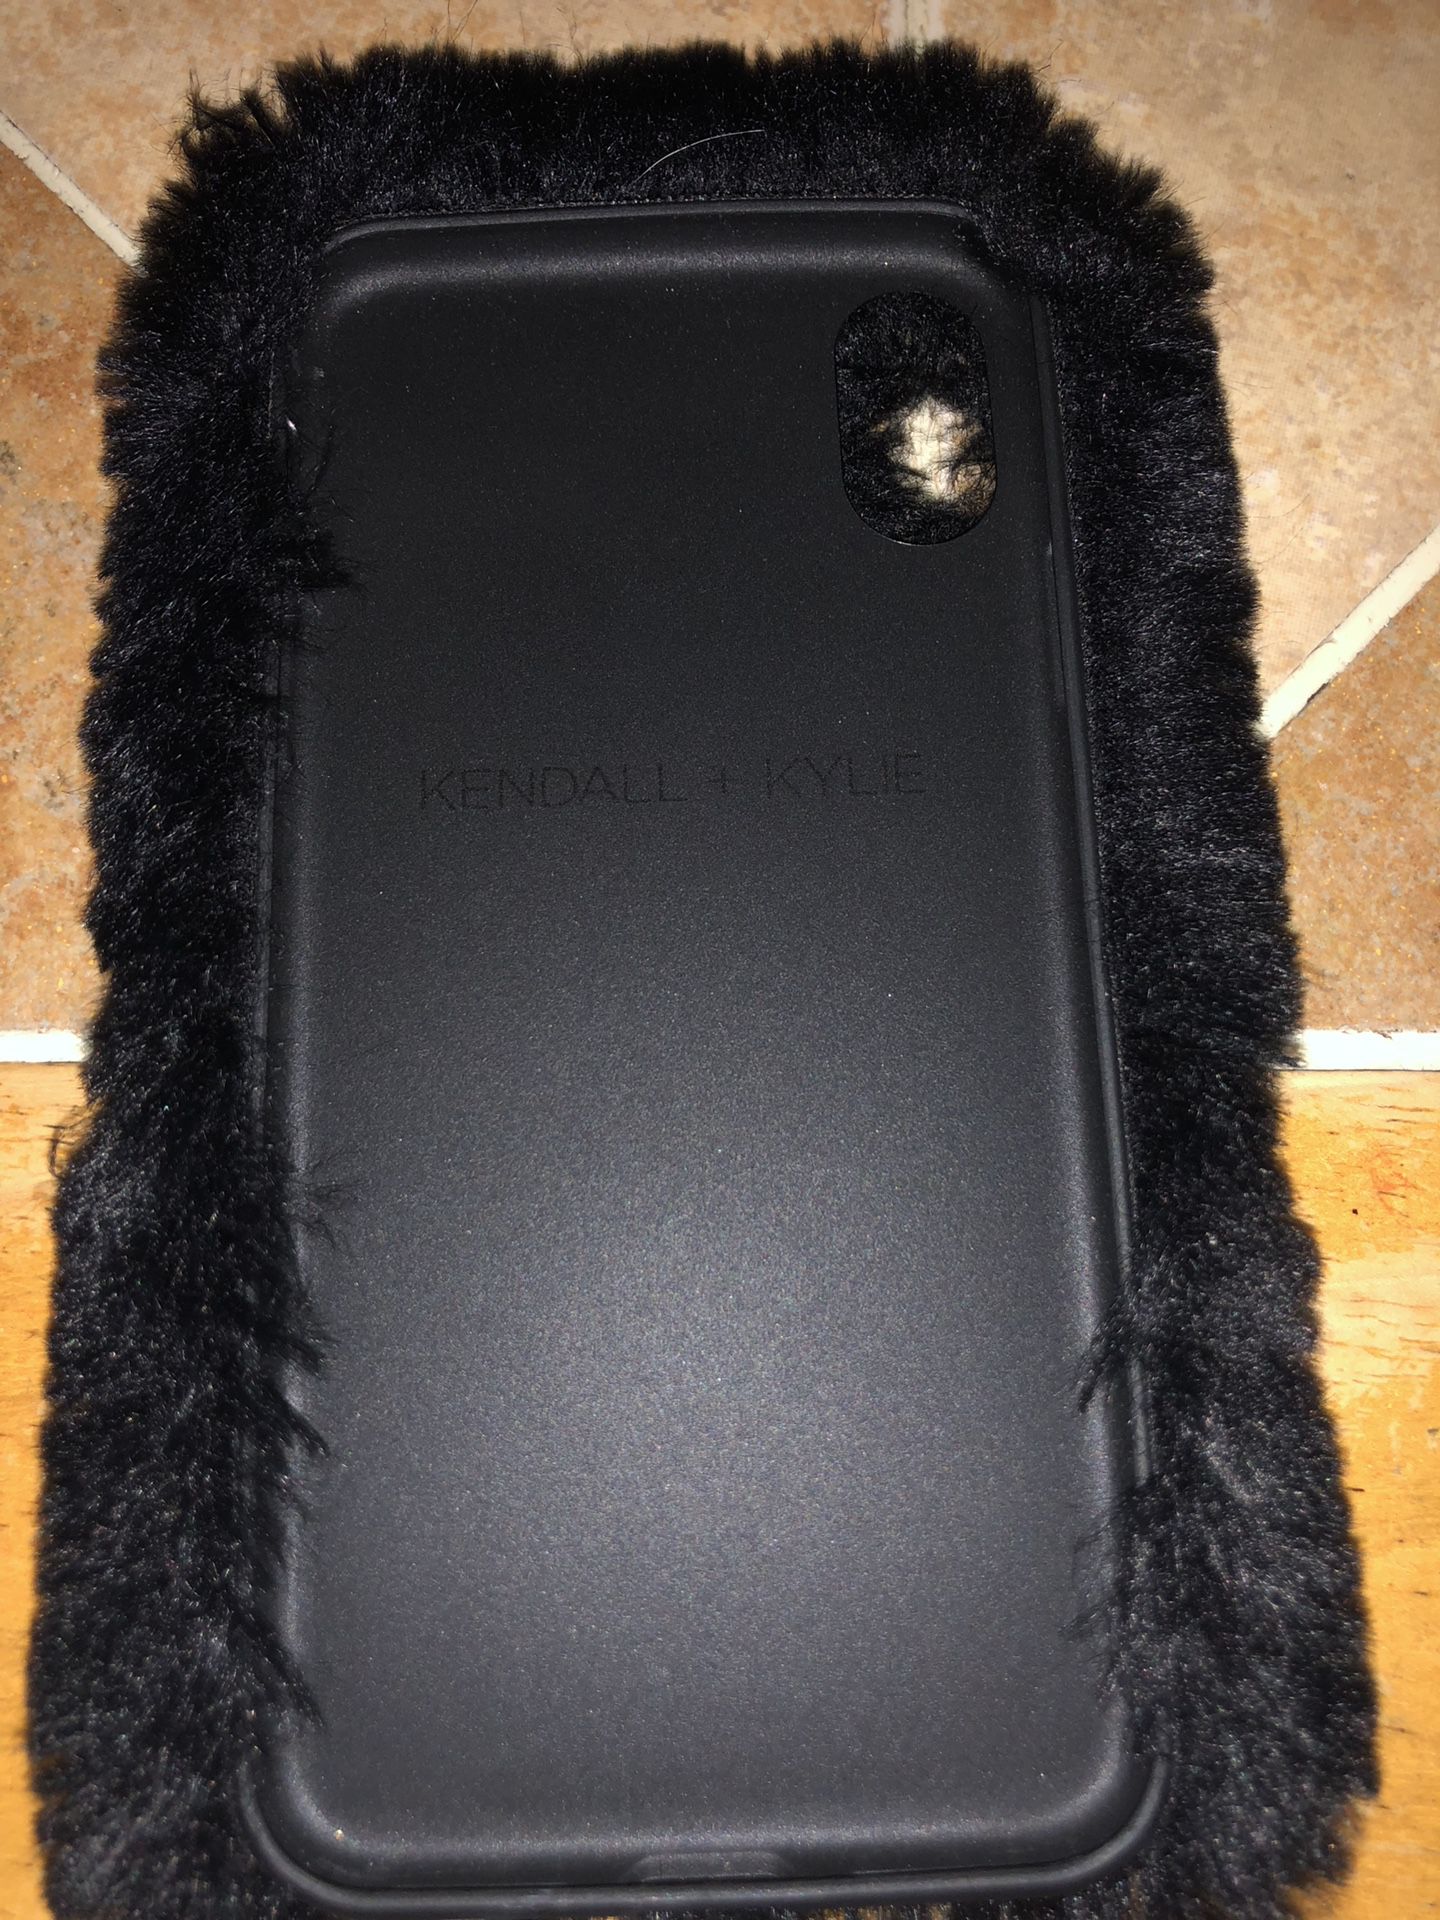 iPhone XS and X cases Kendall+Kyle